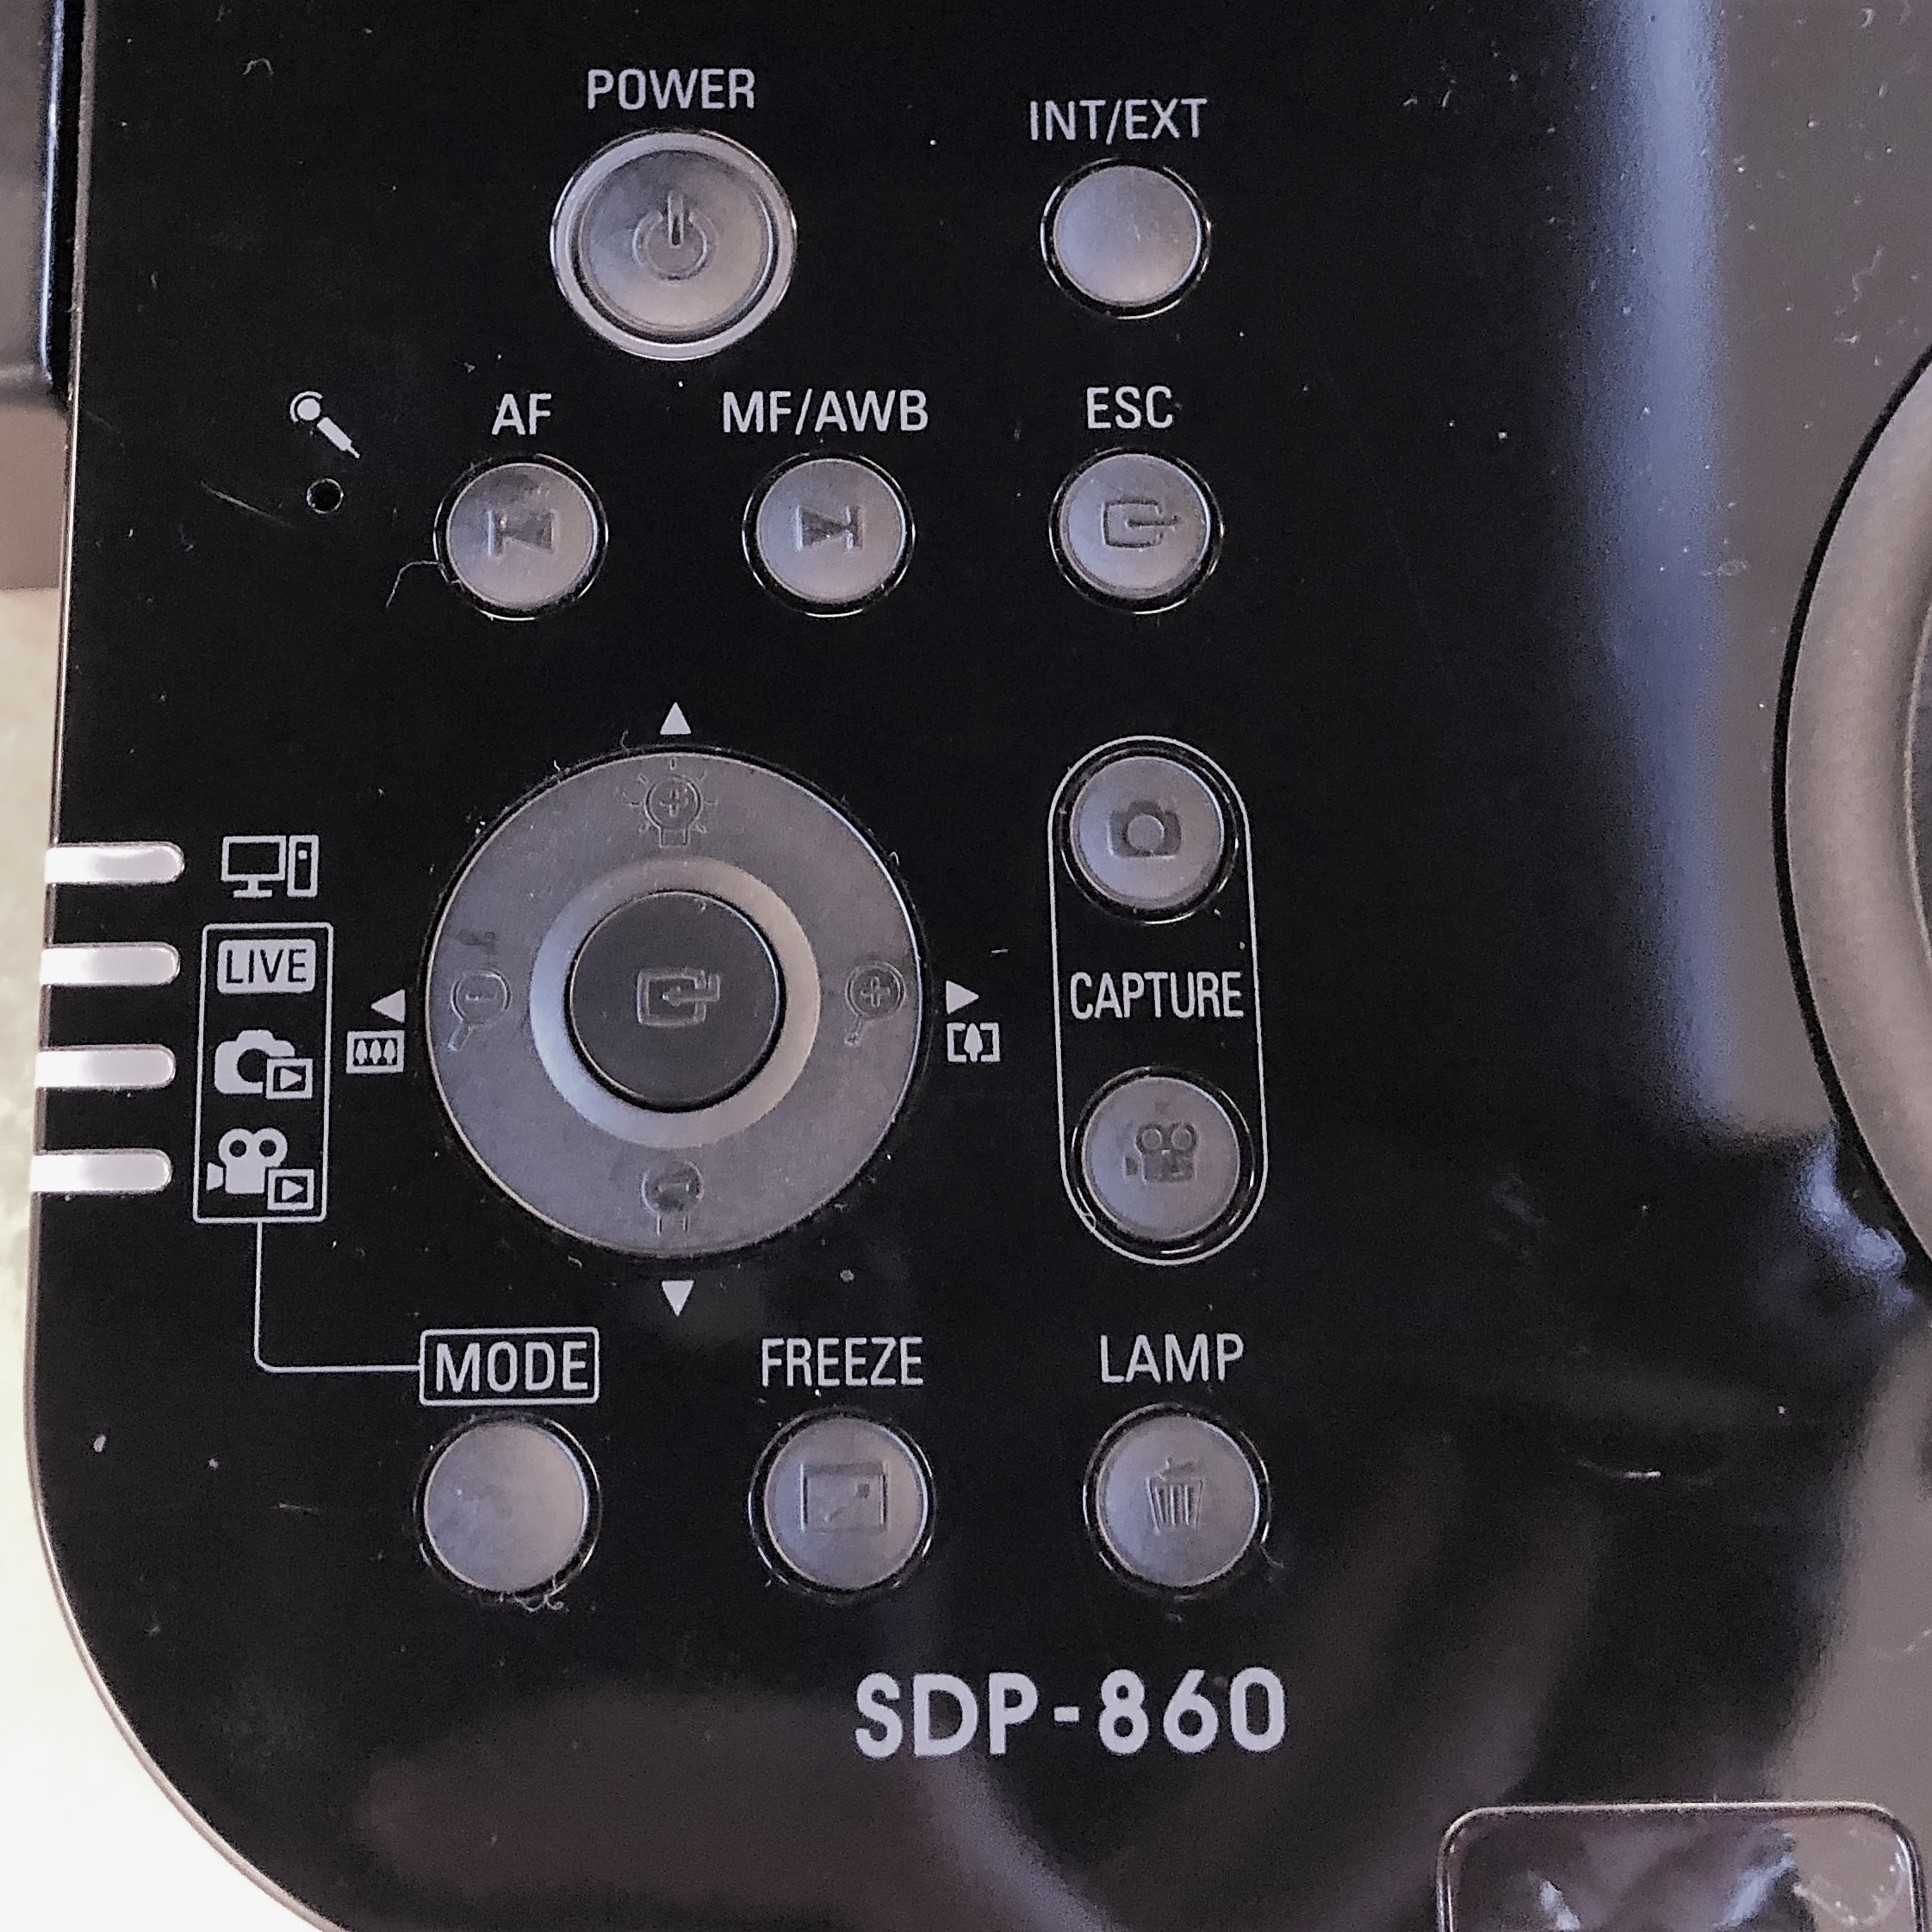 Samsung SDP-860 model document camera, zoomed in on control buttons